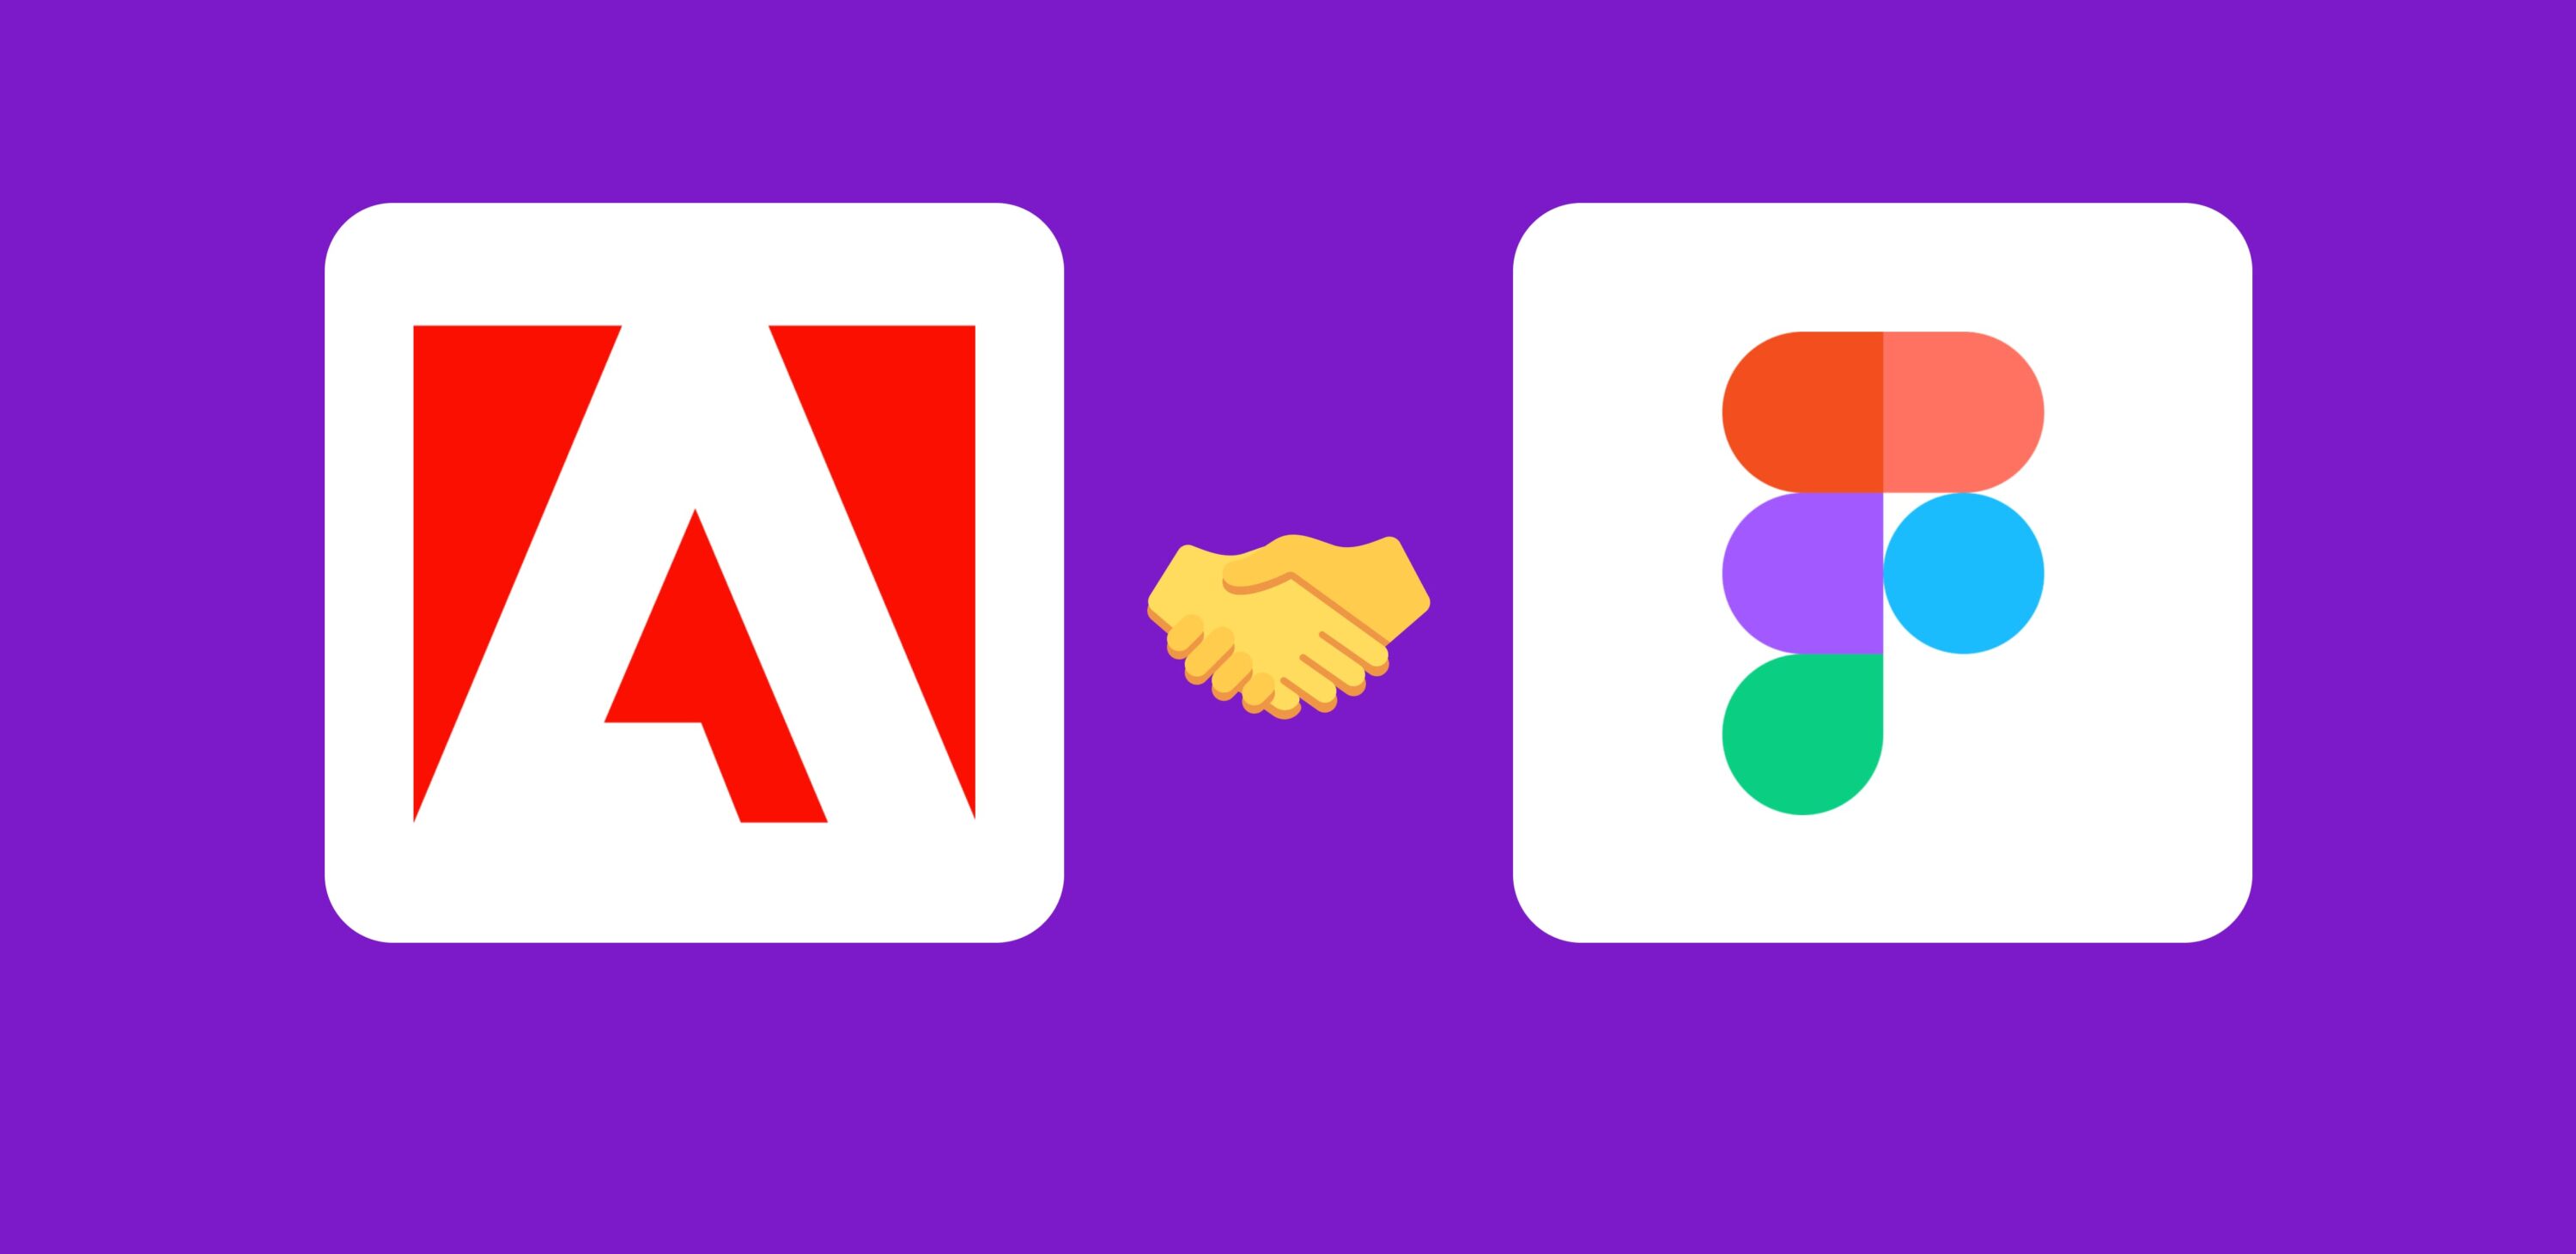 featured image to the post adobe to acquire figma.